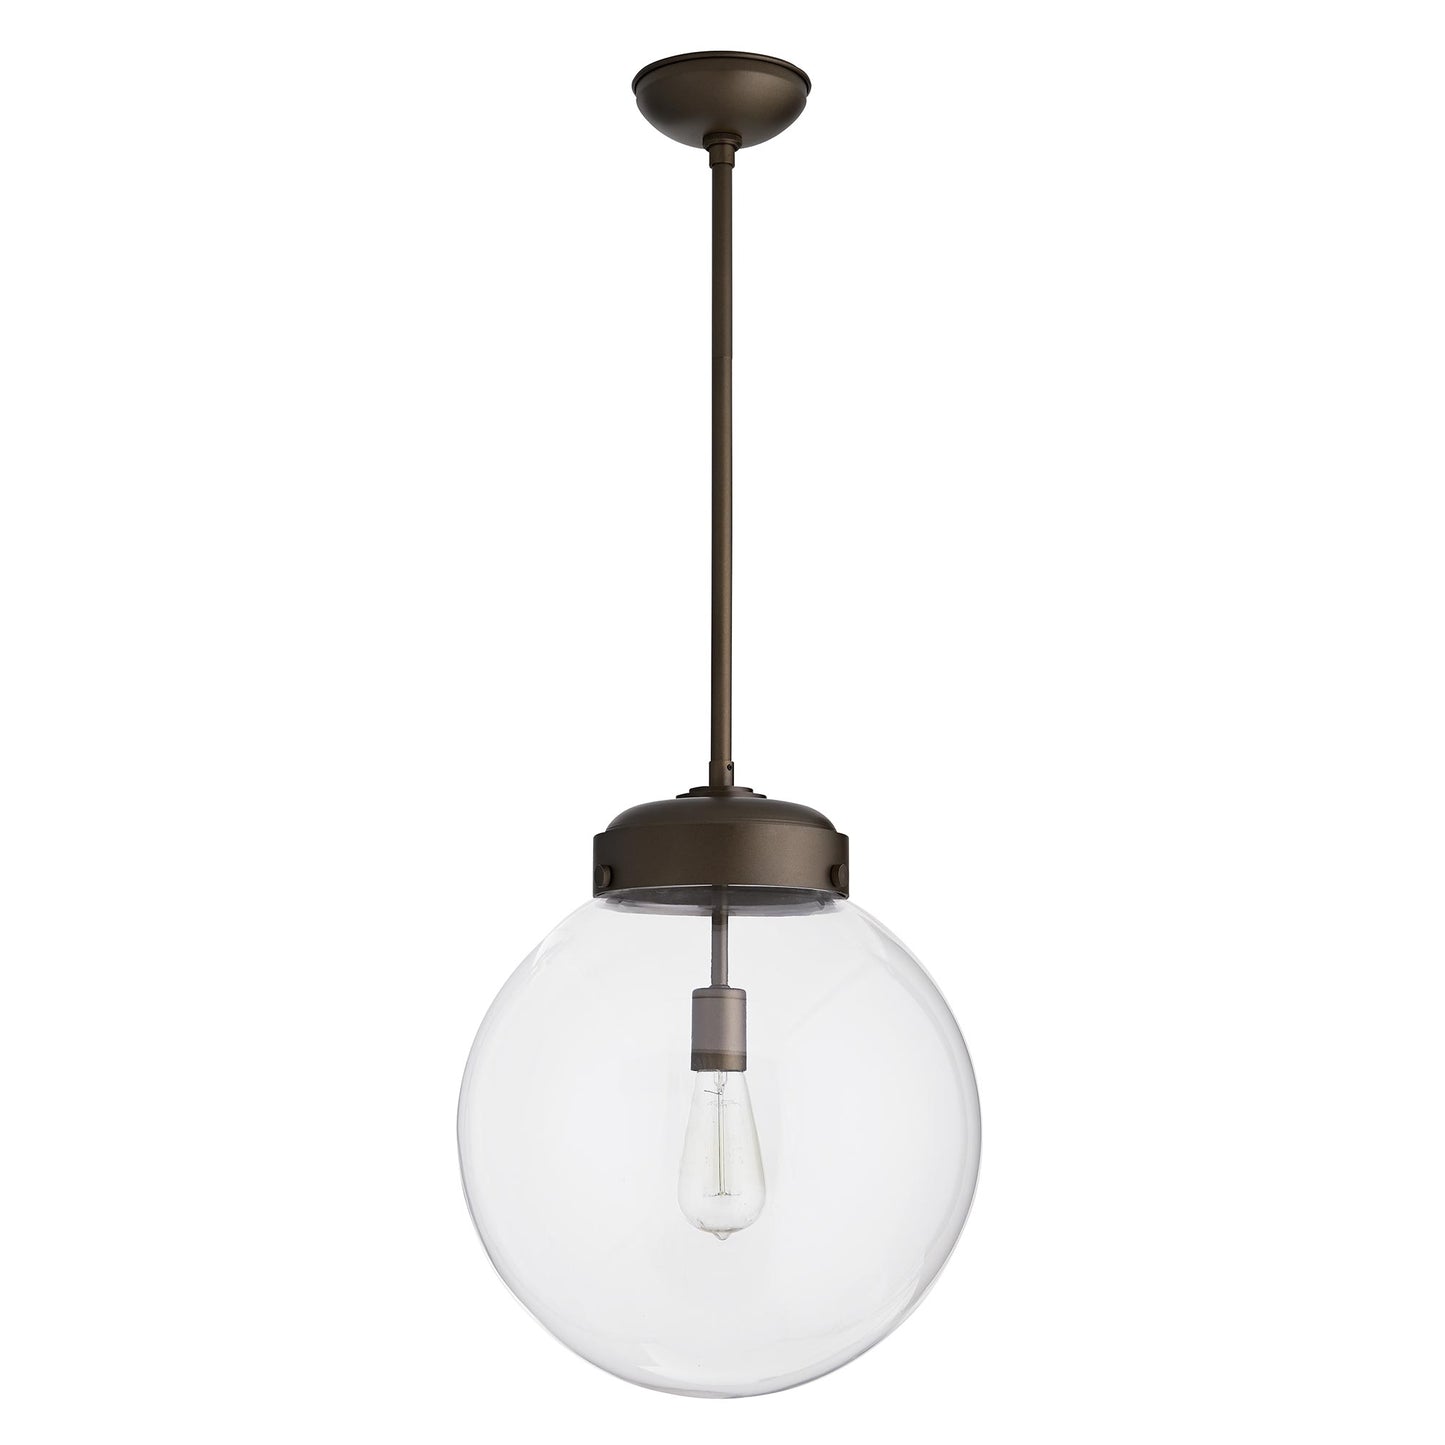 Reeves Large Outdoor Pendant - Antique Brass: Timeless Industrial Globe Pendant with Clear Glass Shade